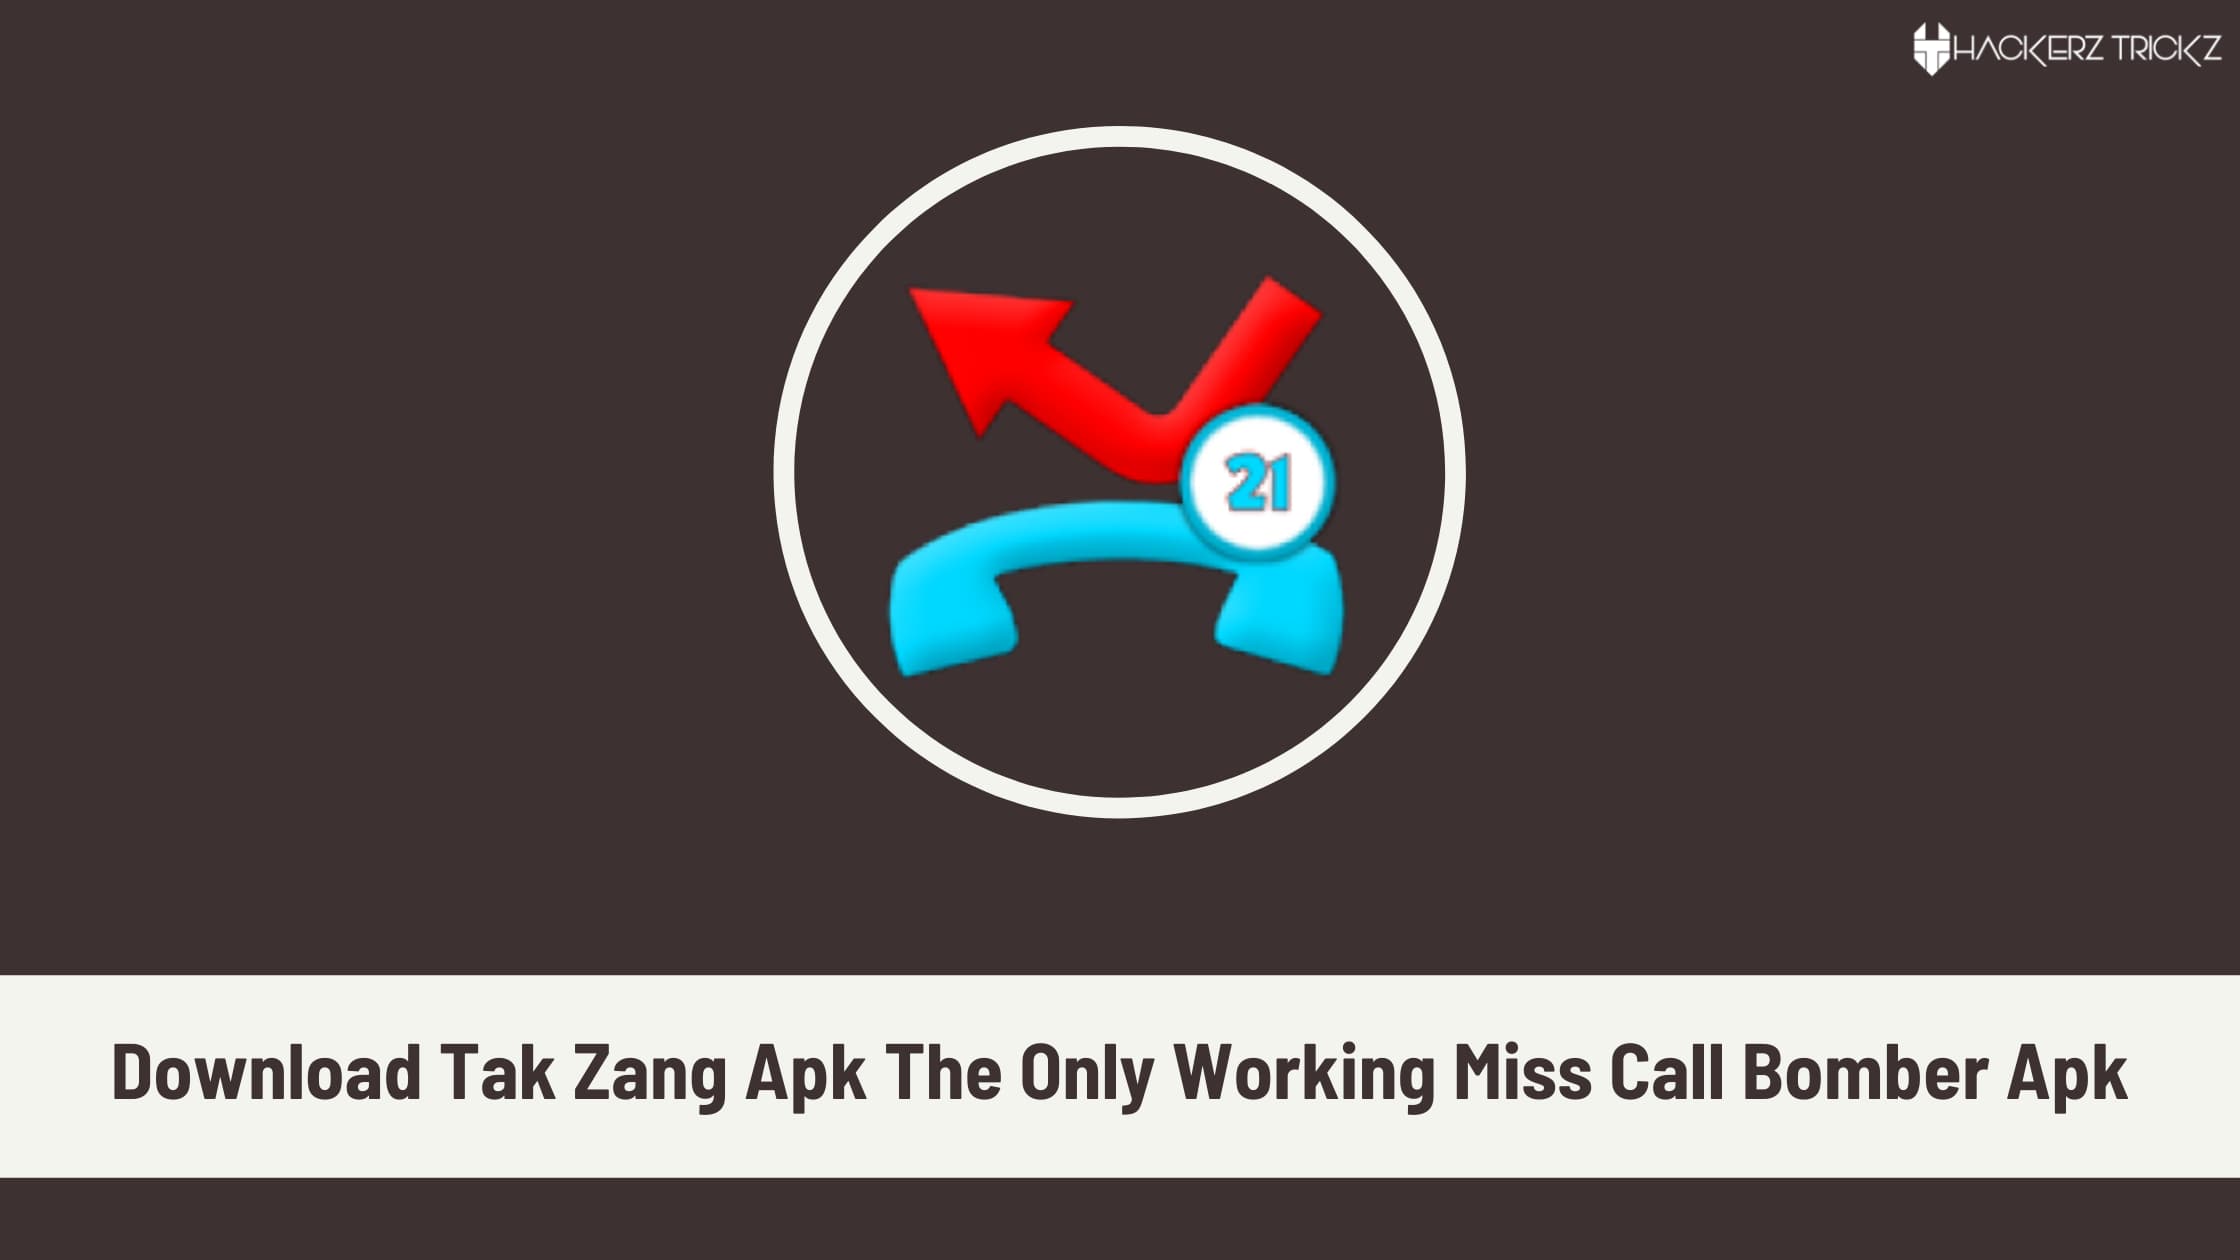 Download Tak Zang Apk The Only Working Miss Call Bomber Apk